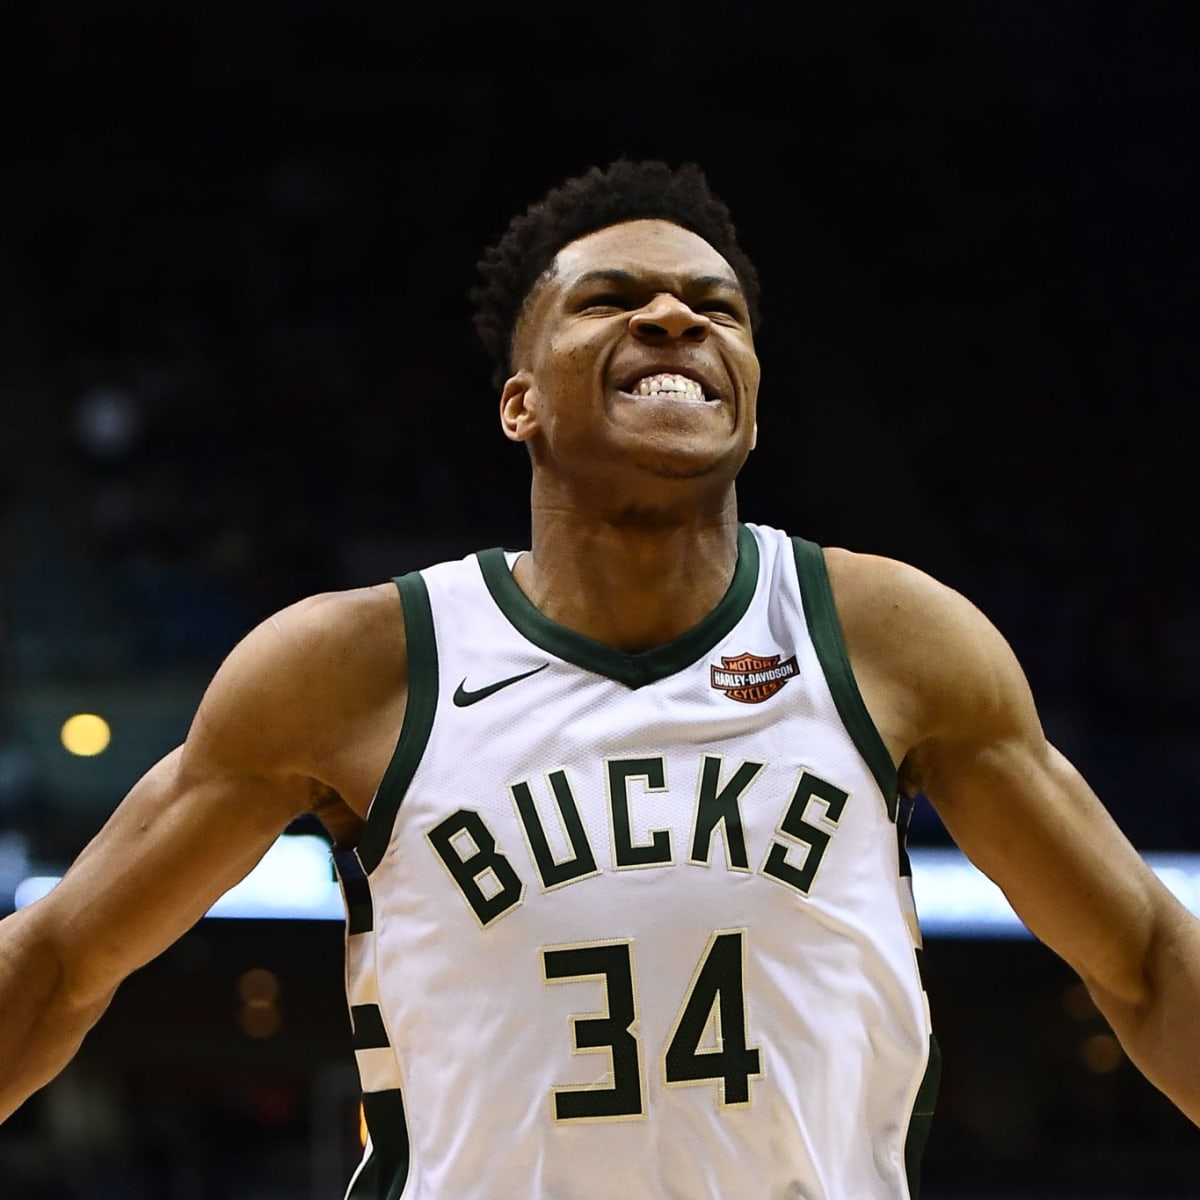 Giannis Antetokounmpo and the Milwaukee Bucks are squashing potential drama  over his contract, and NBA opponents, with aplomb - The Athletic